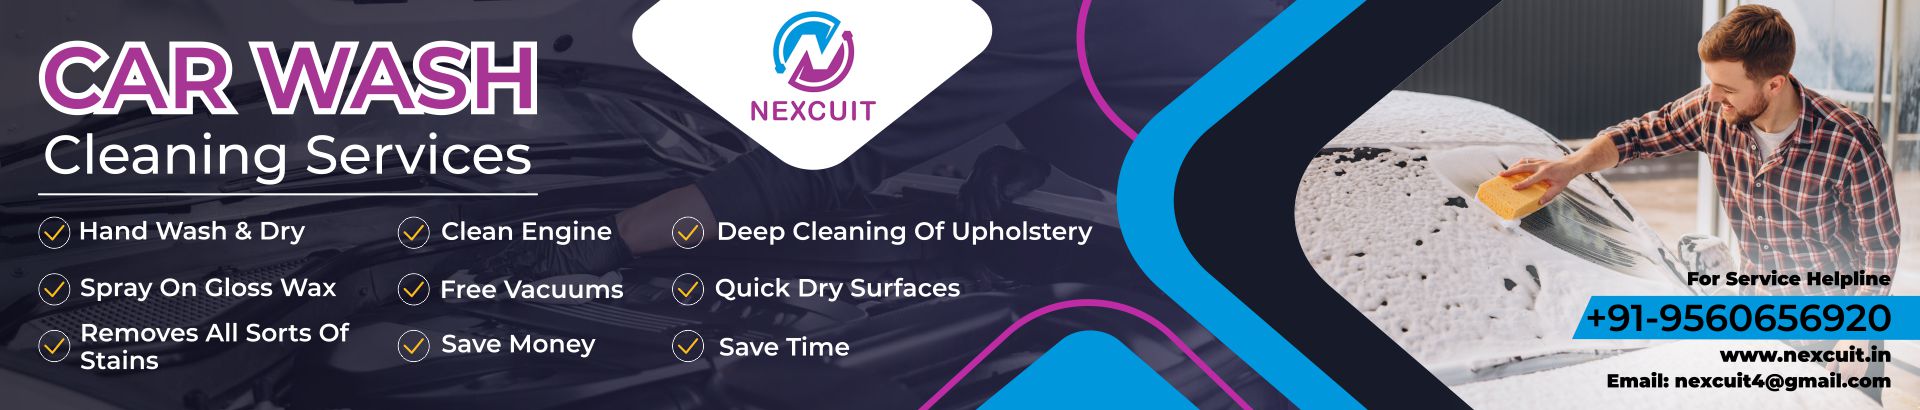 car wash dry cleaning services in gurgaon